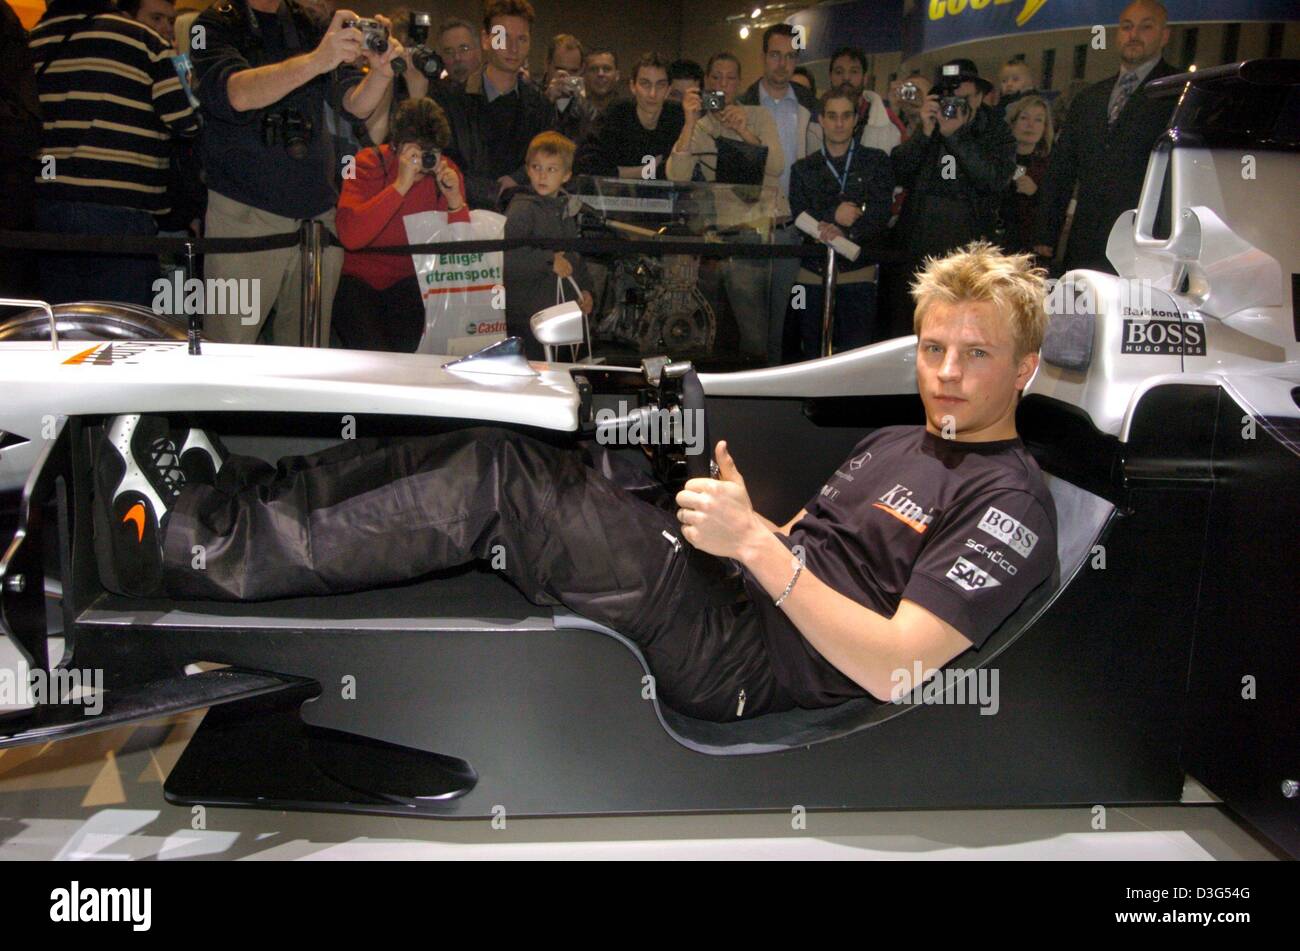 (dpa) - Finnish formula one pilot Kimi Raeikkoenen demonstrates in an open race car how formula one drivers sit in their bolides at the market stand of his McLaren-Mercedes racing team at the Motor Show in Essen, Germany, 6 December 2003. Stock Photo